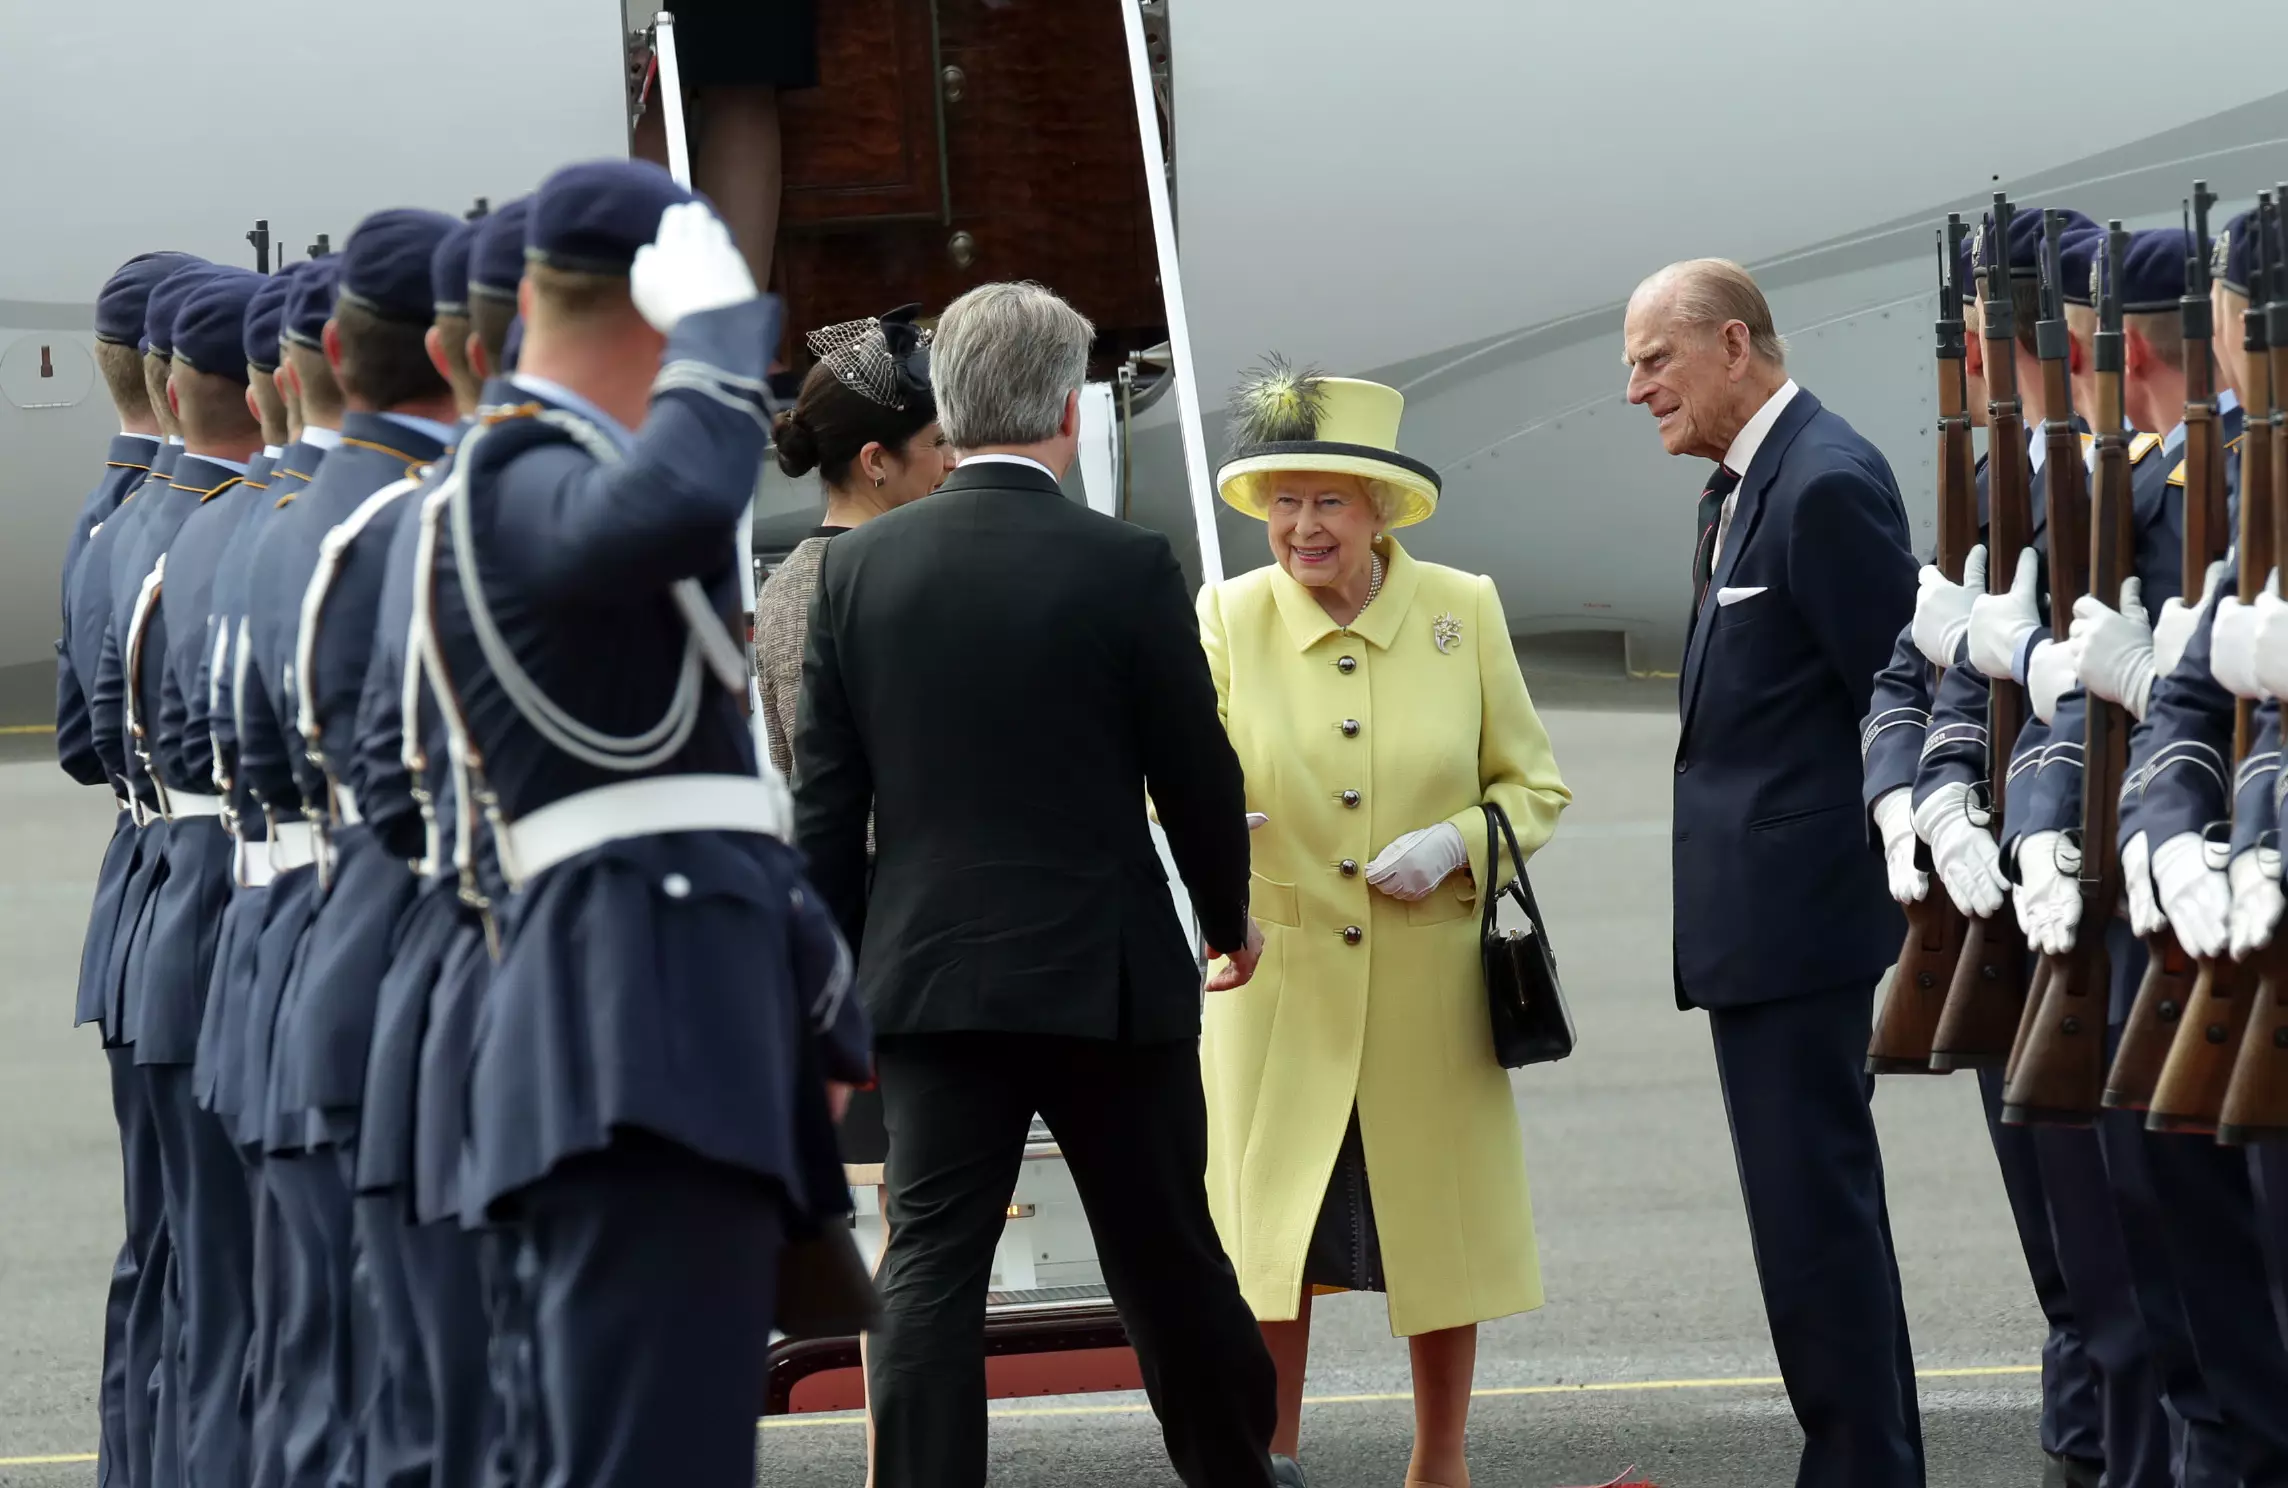 The Queen is an especially well-travelled monarch (